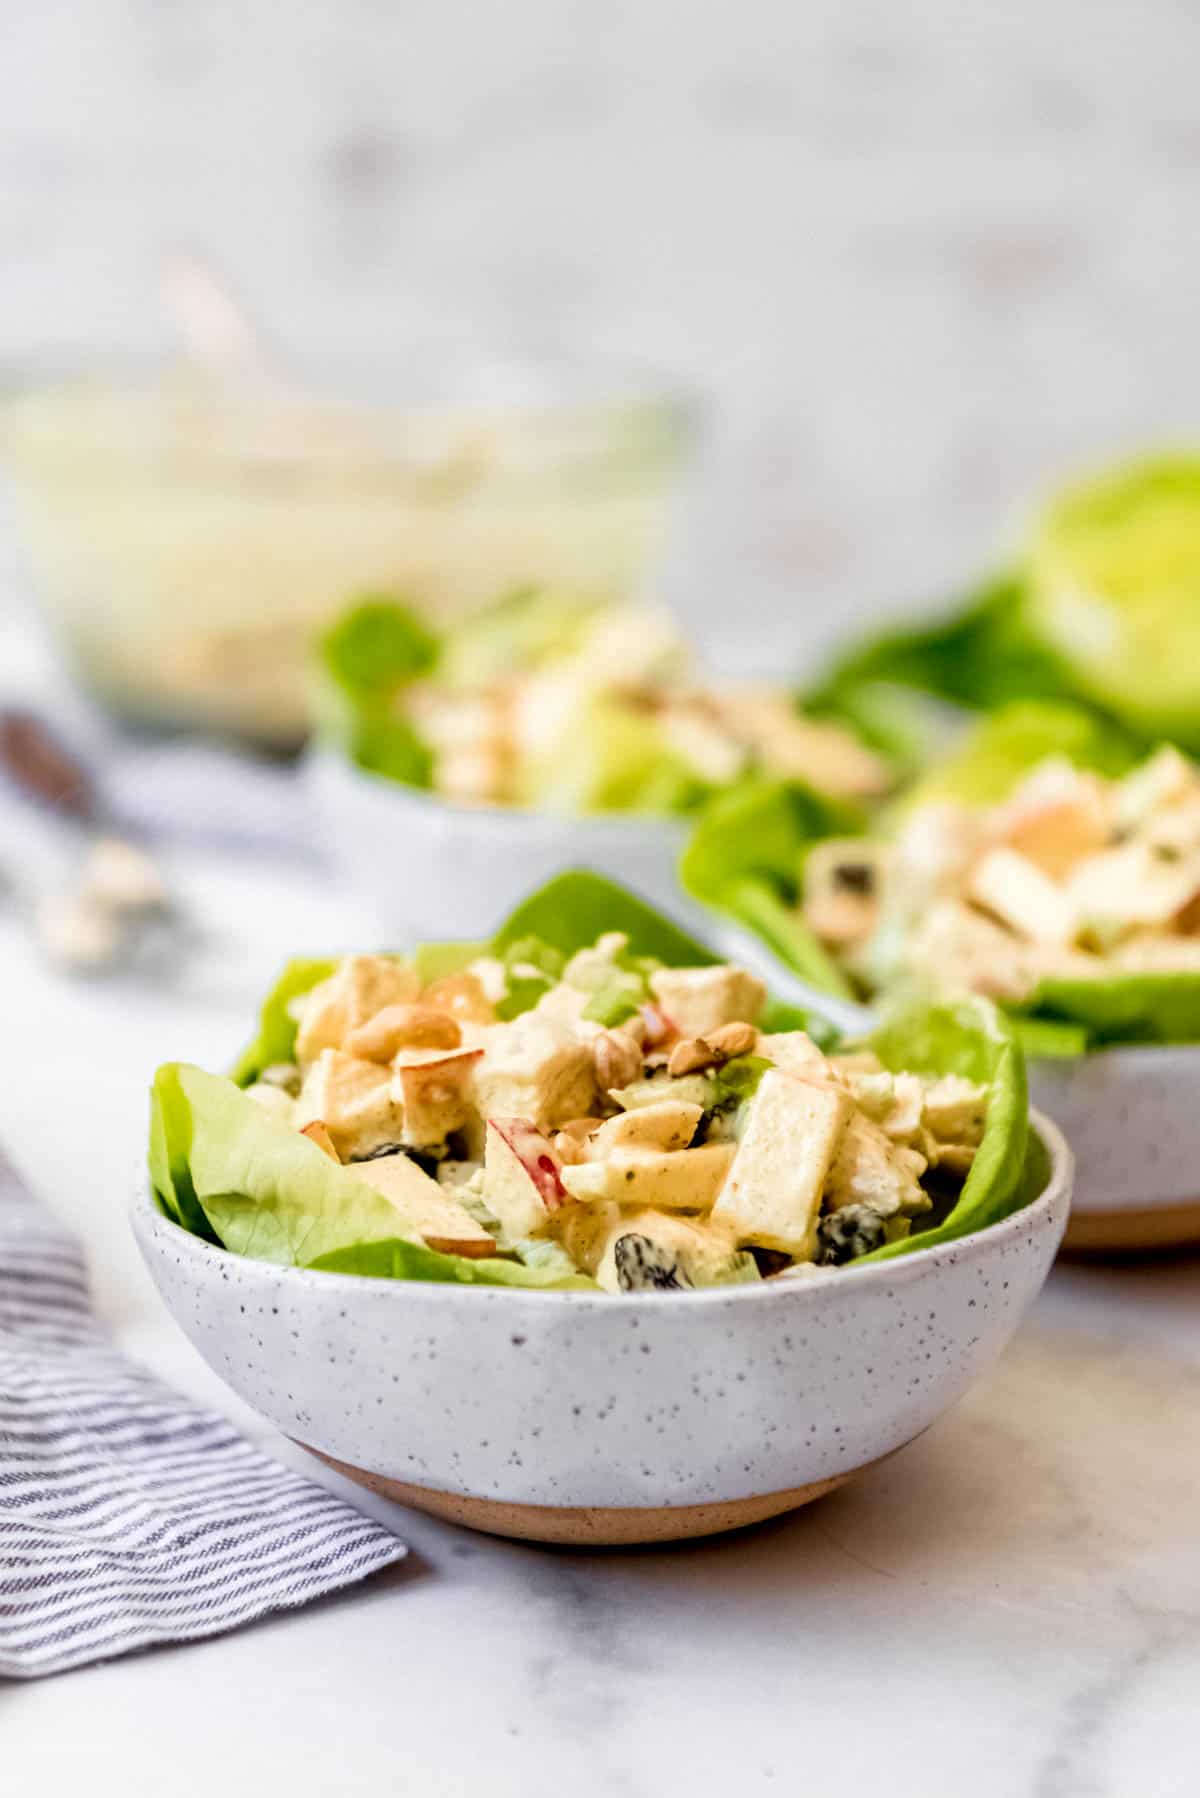 Curried chicken salad in bowl with greens.